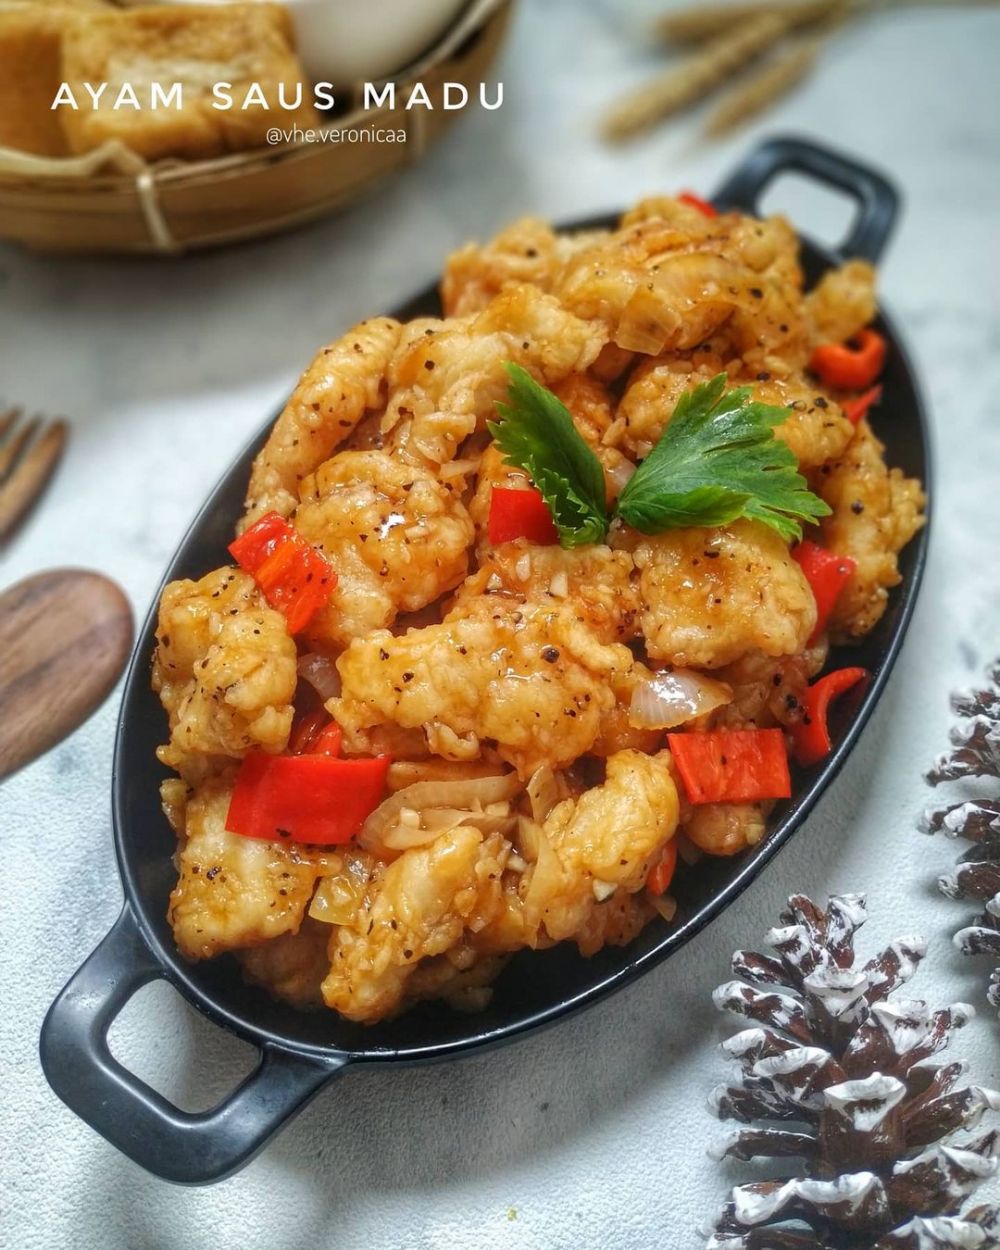 The recipe for fried chicken with honey sauce, sweet and savory, makes me addicted